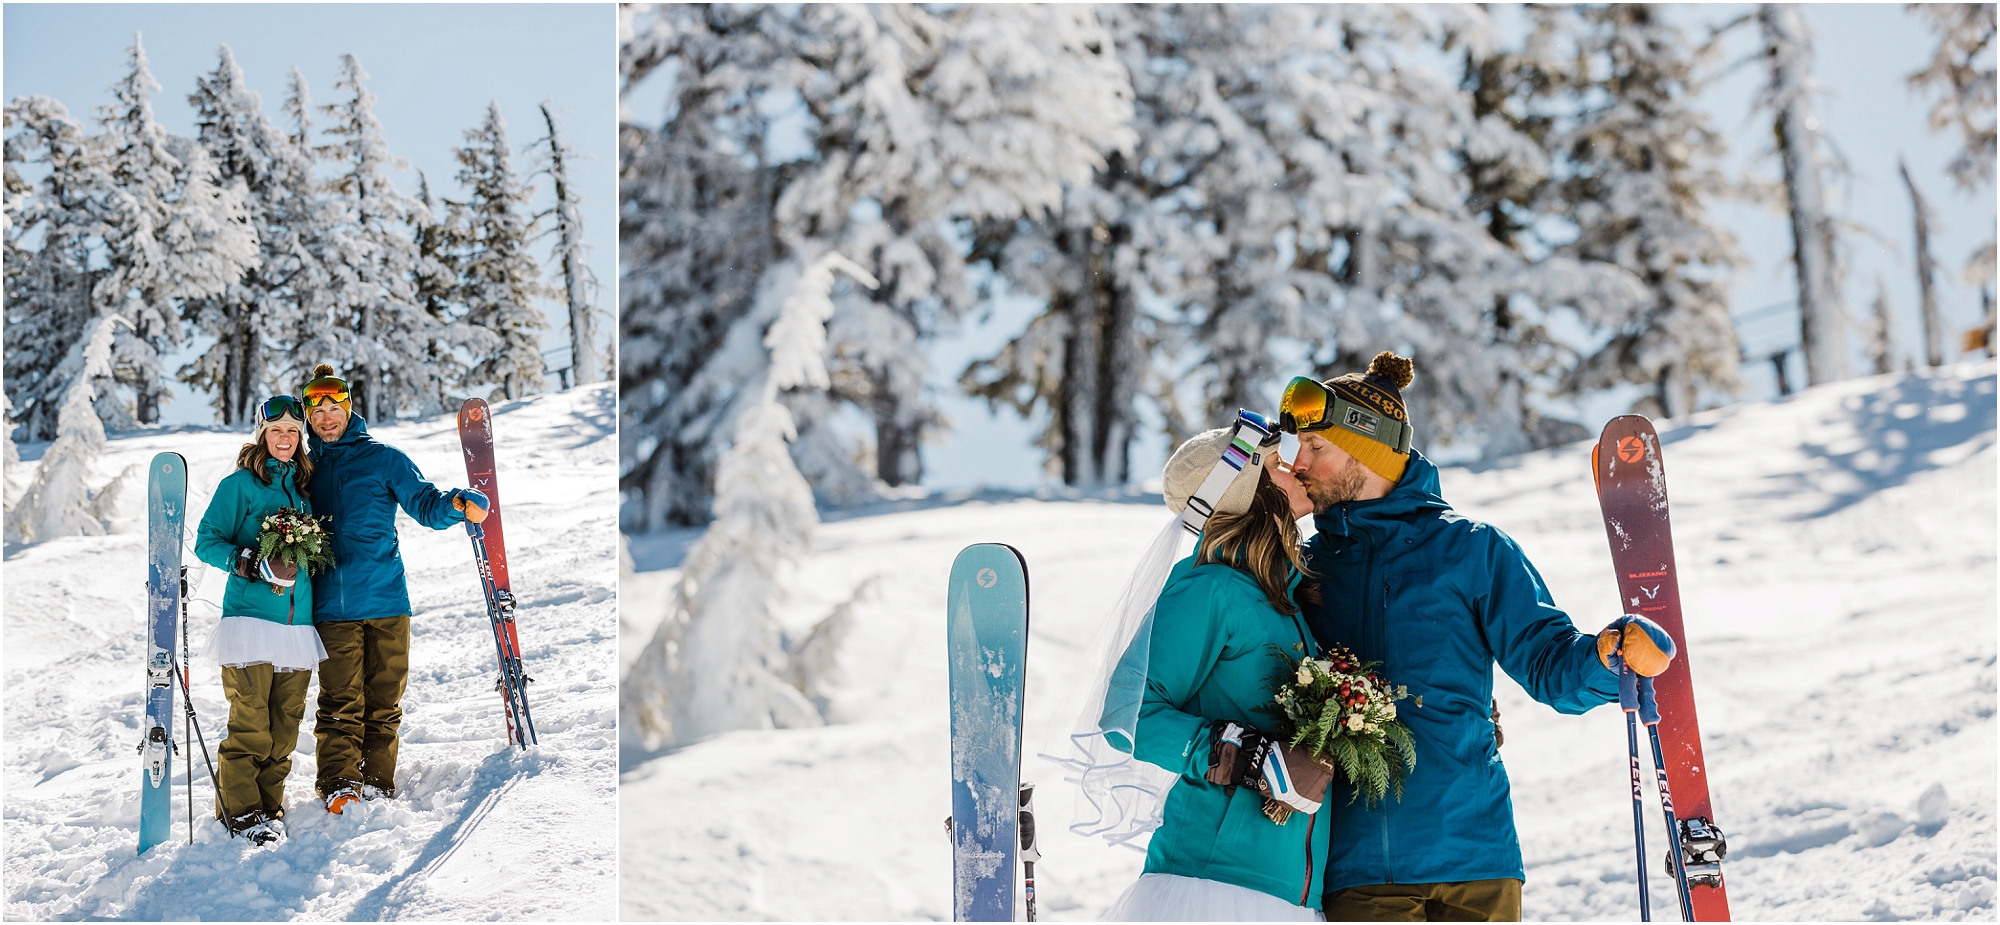 A bride wearing a teal jacket, white tutu and veil, kisses her groom wearing a cobalt blue jacket as they pose with their skis at Mt Bachelor ski resort in Bend, Oregon. | Erica Swantek Photography